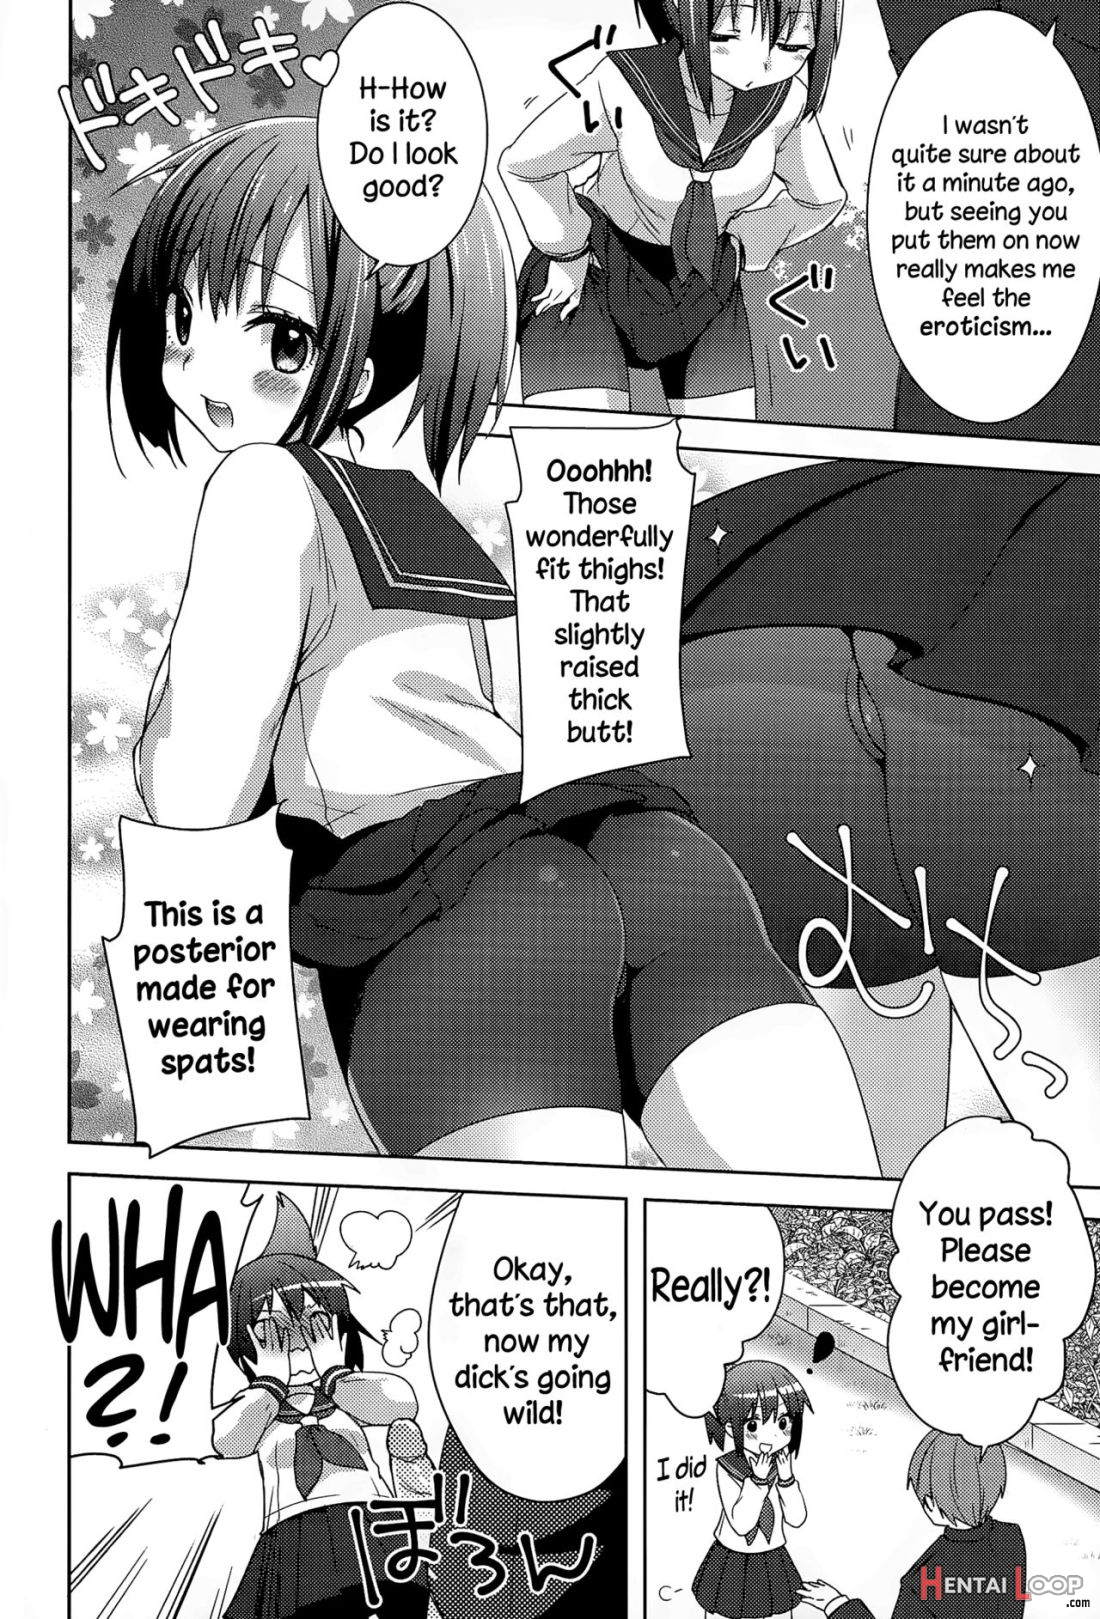 Houkago Spats page 8